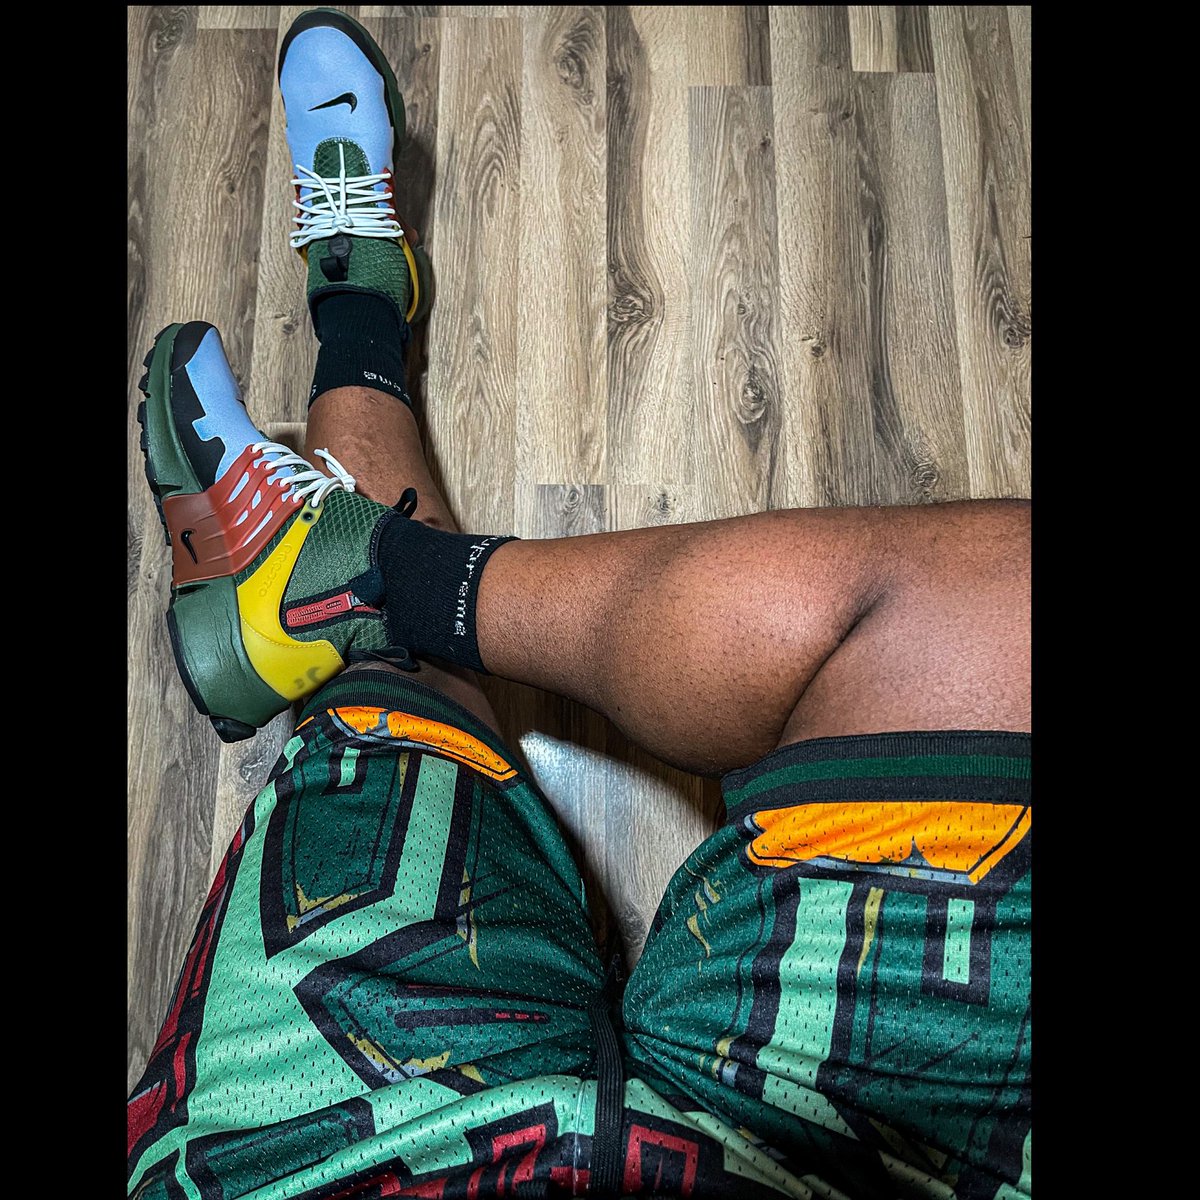 In honor of another EPIC of @bookofbobafett I had to fully commit to watching this episode in #BobaFett gear..⠀
⠀
Shorts by @savsnrband⠀
Socks by @supremenewyork⠀
Shoes by @nike - Nike AirPresto Mid “Boba Fett”⠀
⠀
Can’t wait till next week’s episode #BookofBobbaFett